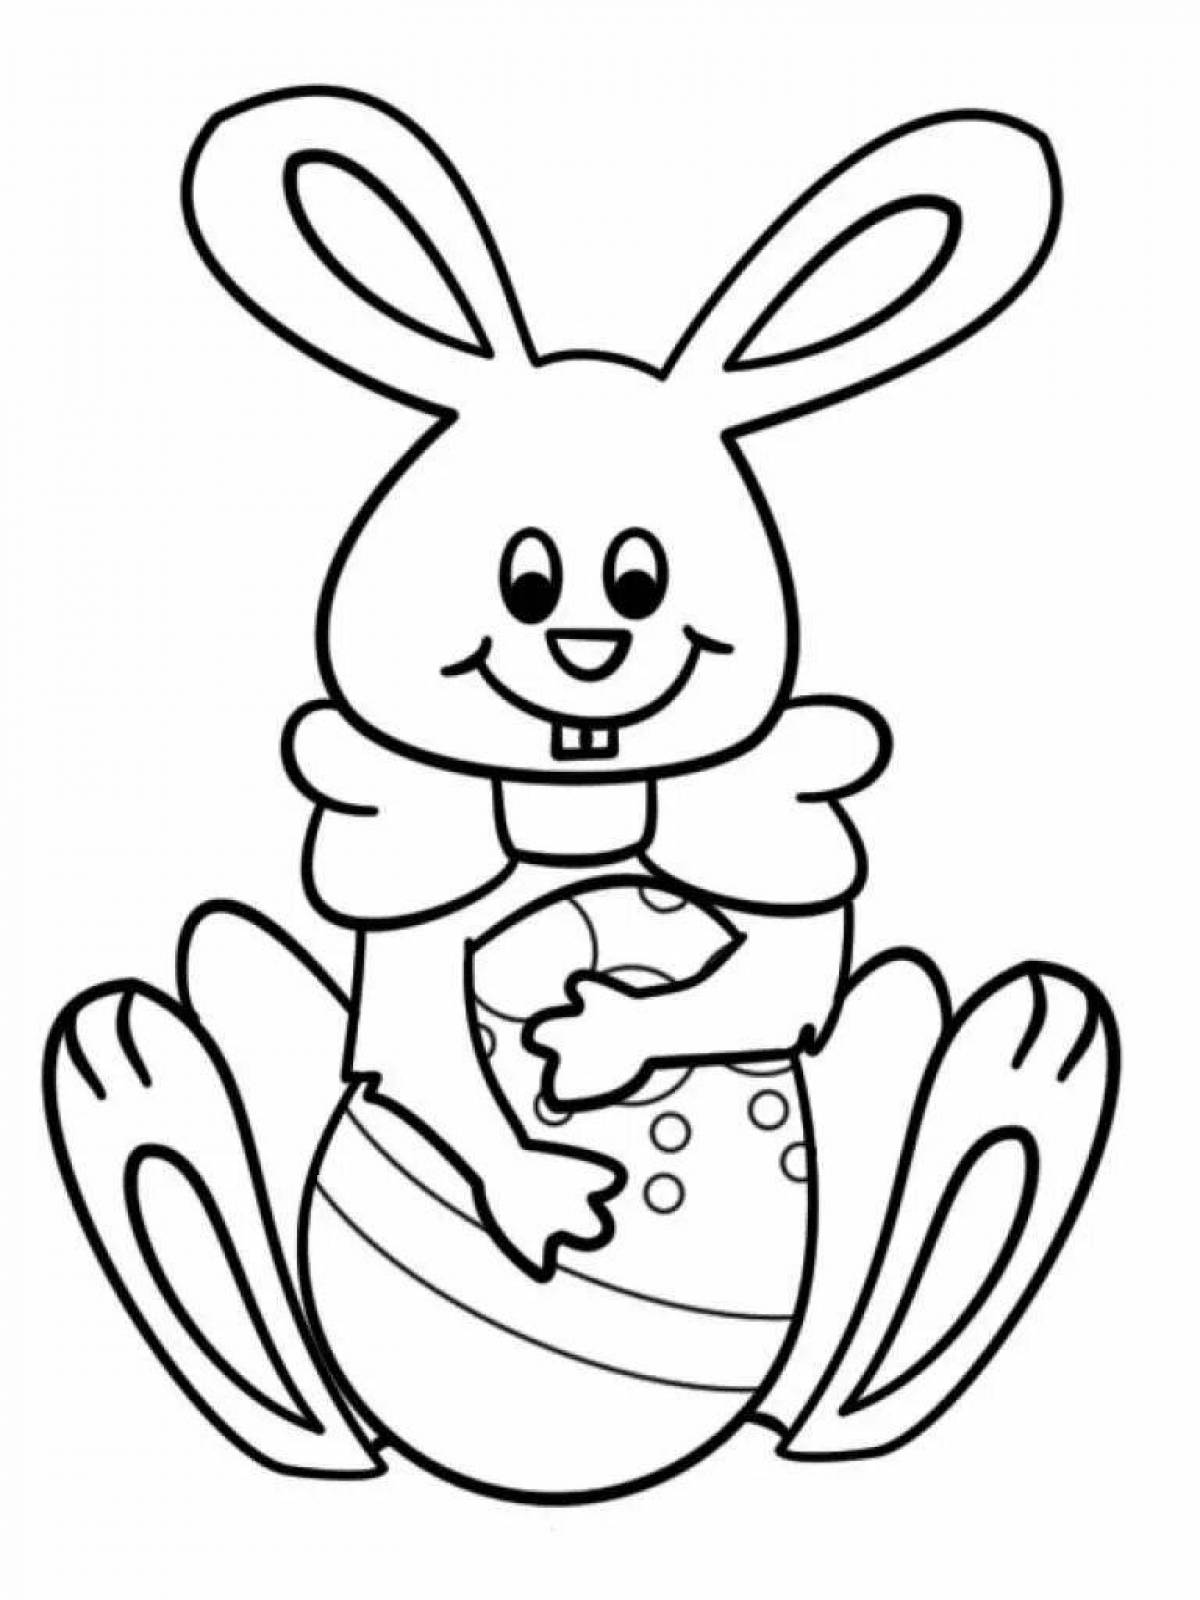 Coloring book shiny hare